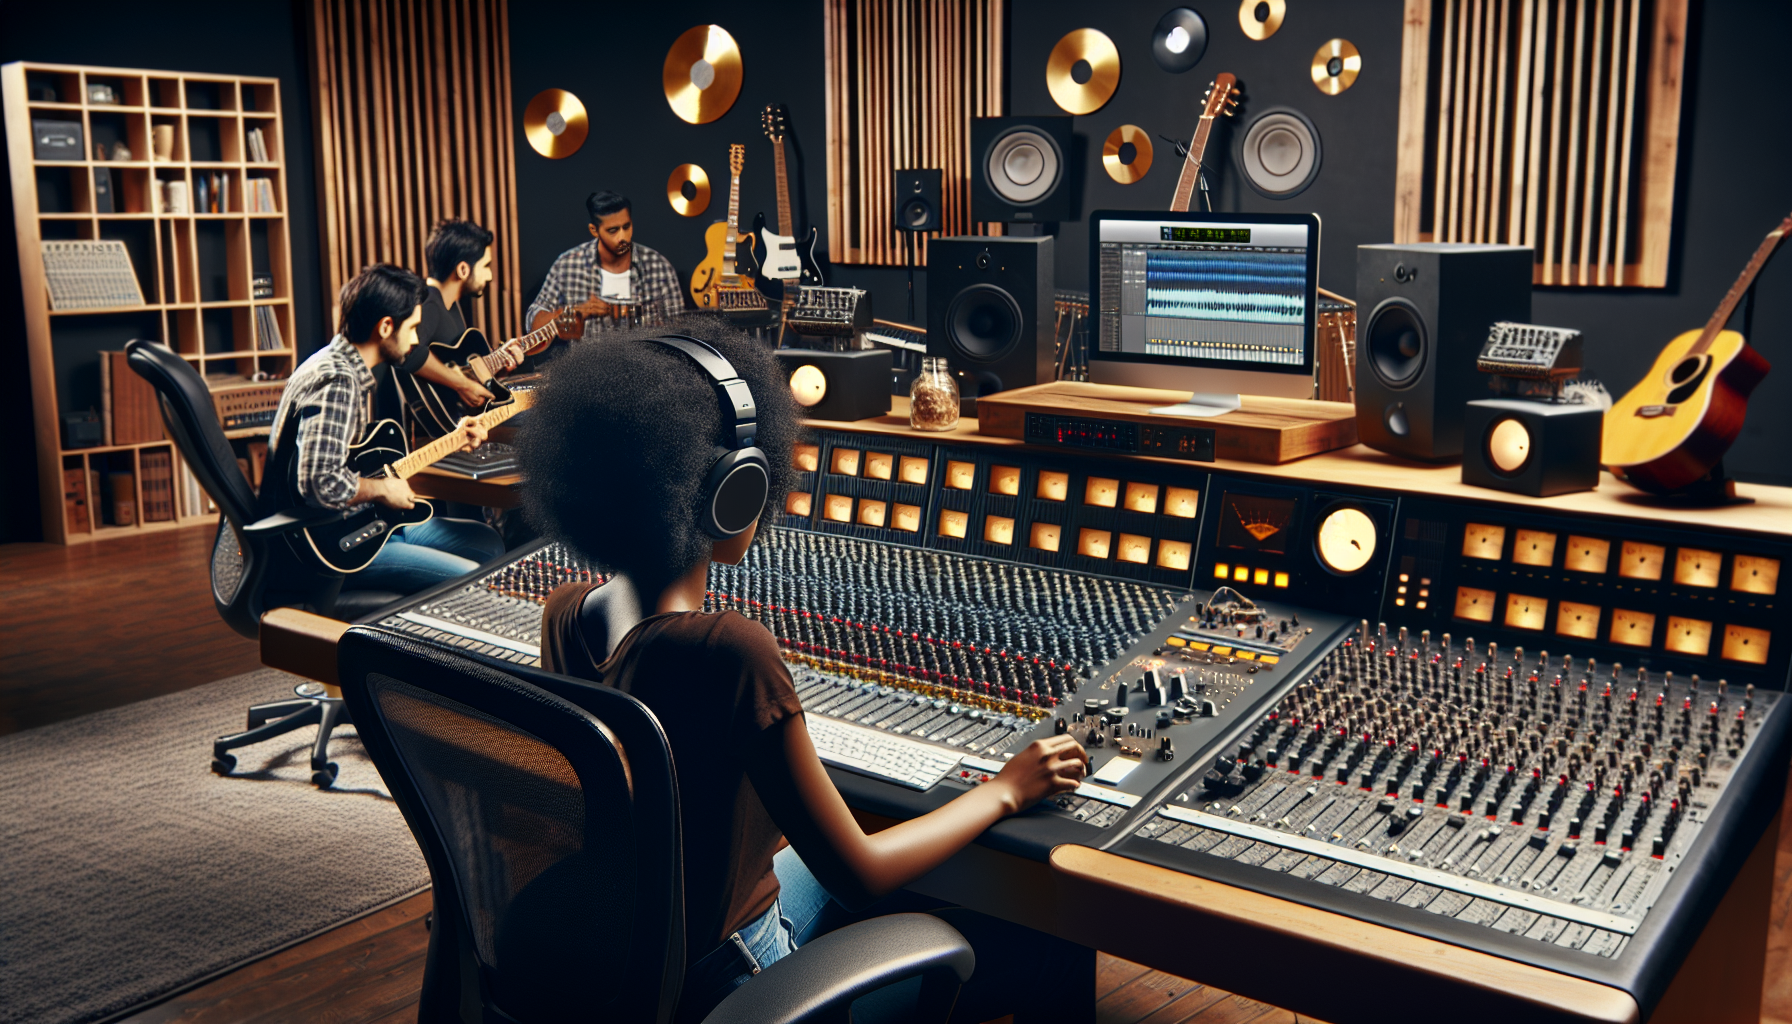 Inside the Studio: The Behind-the-Scenes of Music Production